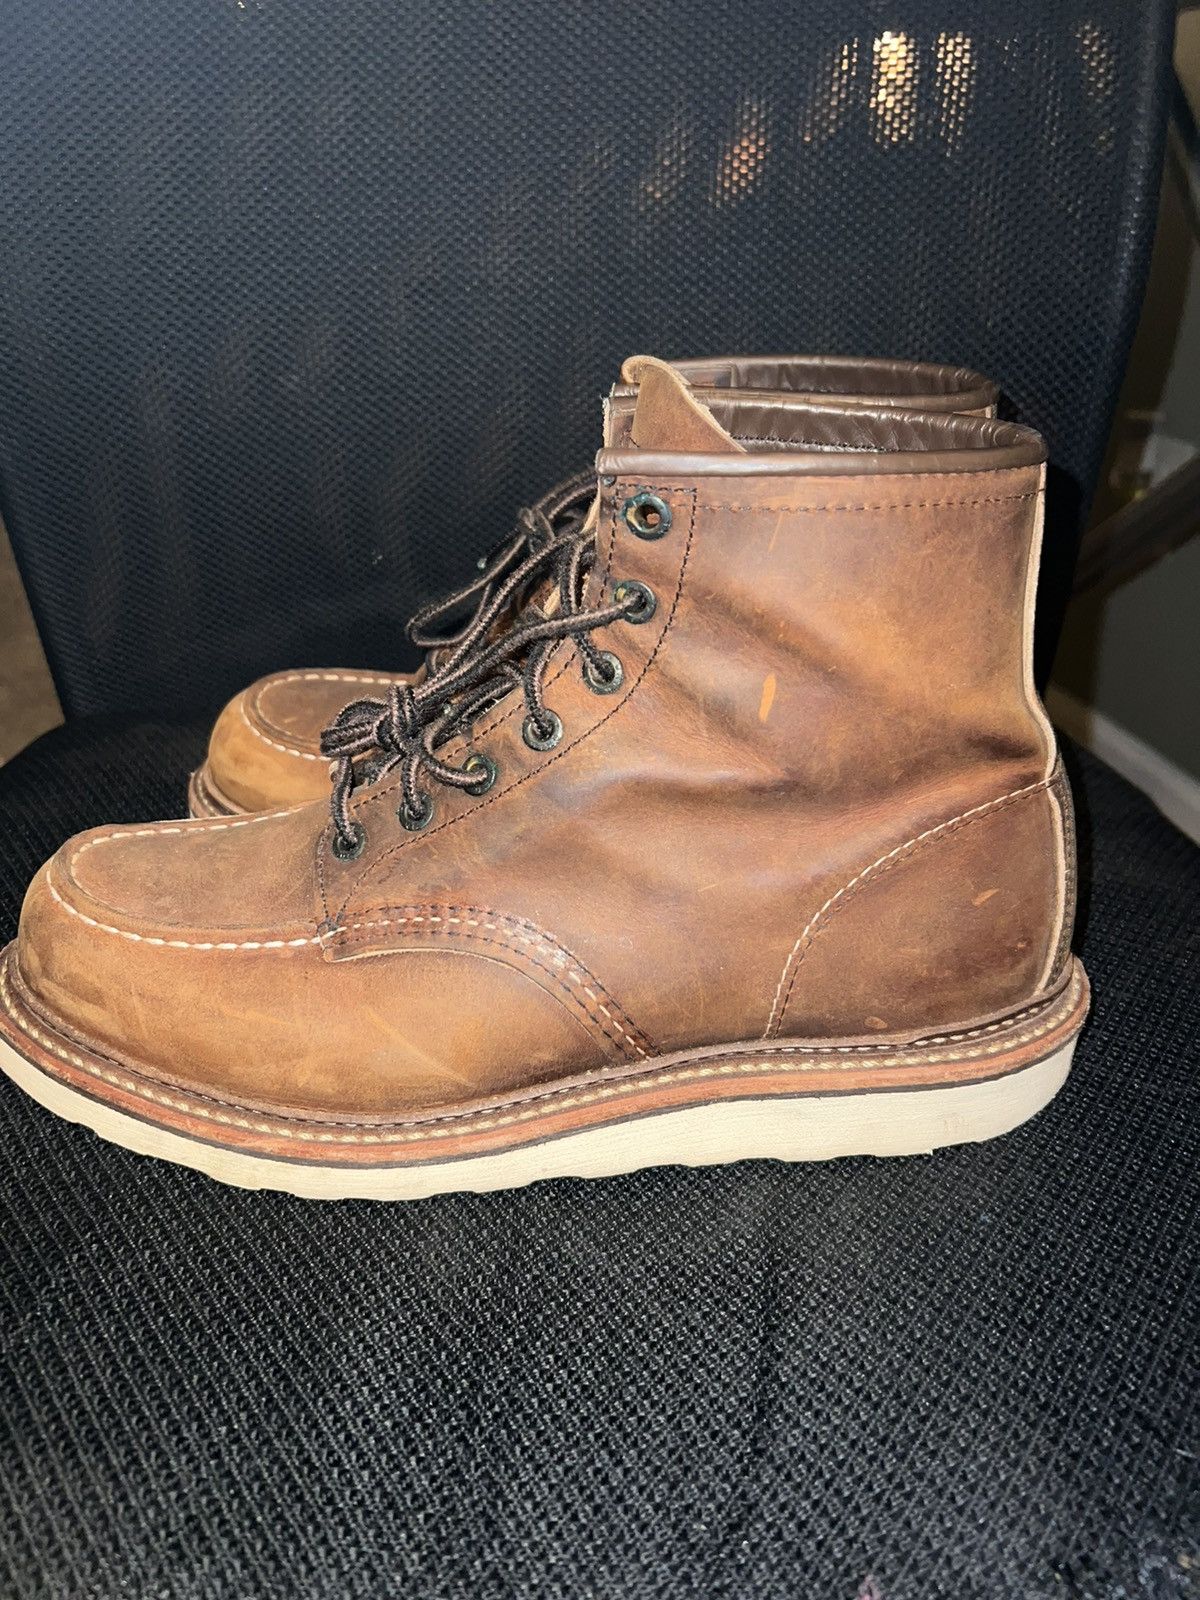 Red Wing Red Wing 1907 size 9 Size US 9 / EU 42 - 8 Thumbnail